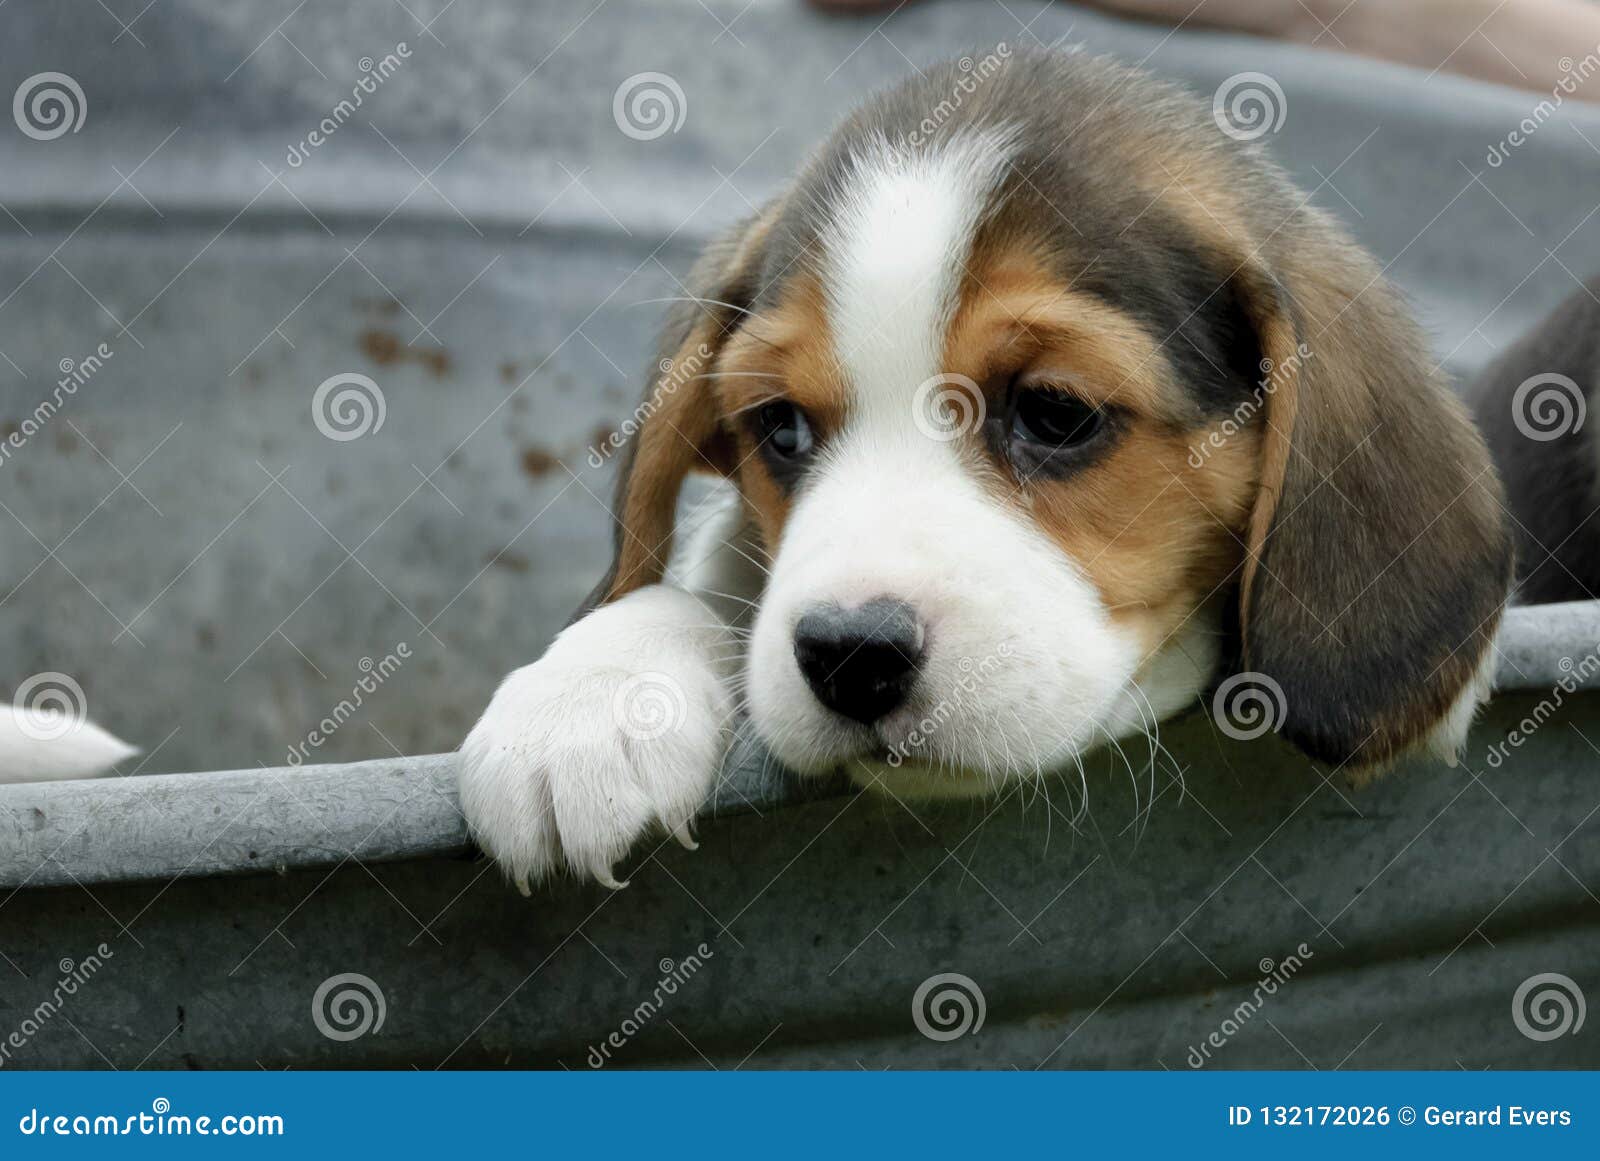 A Little Beagle Puppy Looking Arround Stock Photo Image Of